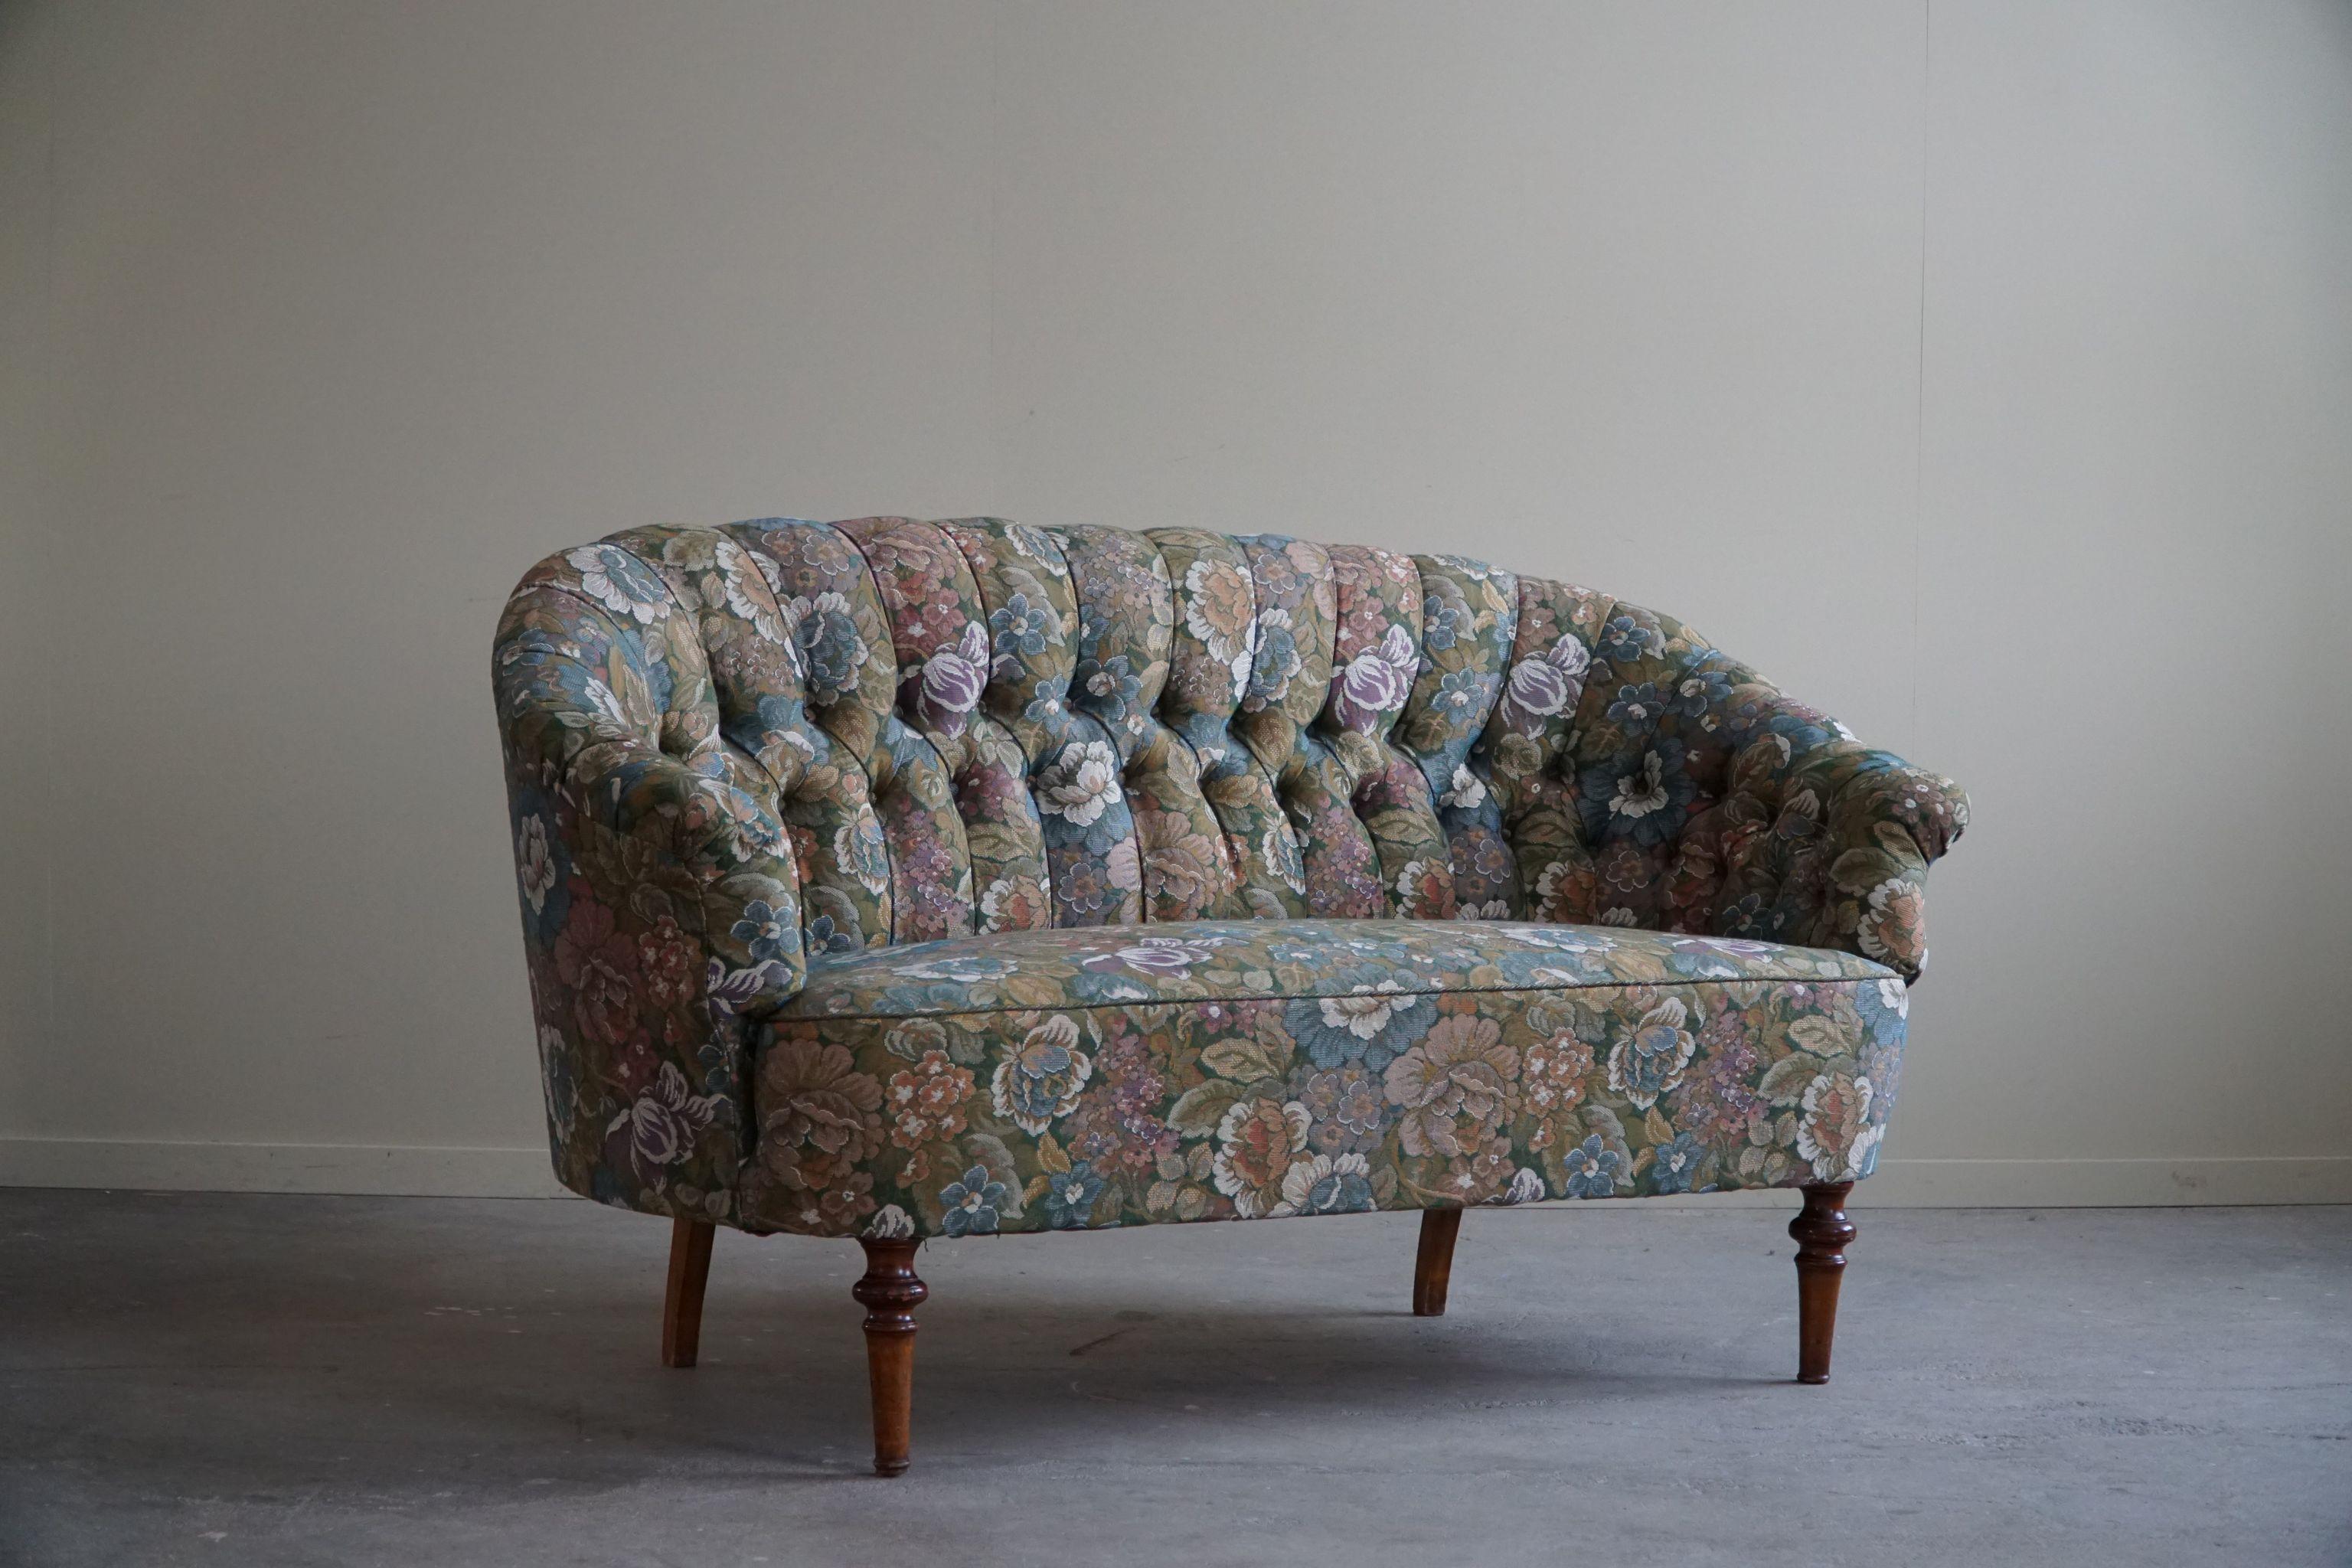 This antique sofa, skillfully crafted by a skilled Danish cabinetmaker in the early 1900s, stands as an exemplar of timeless elegance and expert craftsmanship. The upholstery, adorned with a flora fabric in great condition that adds a touch of